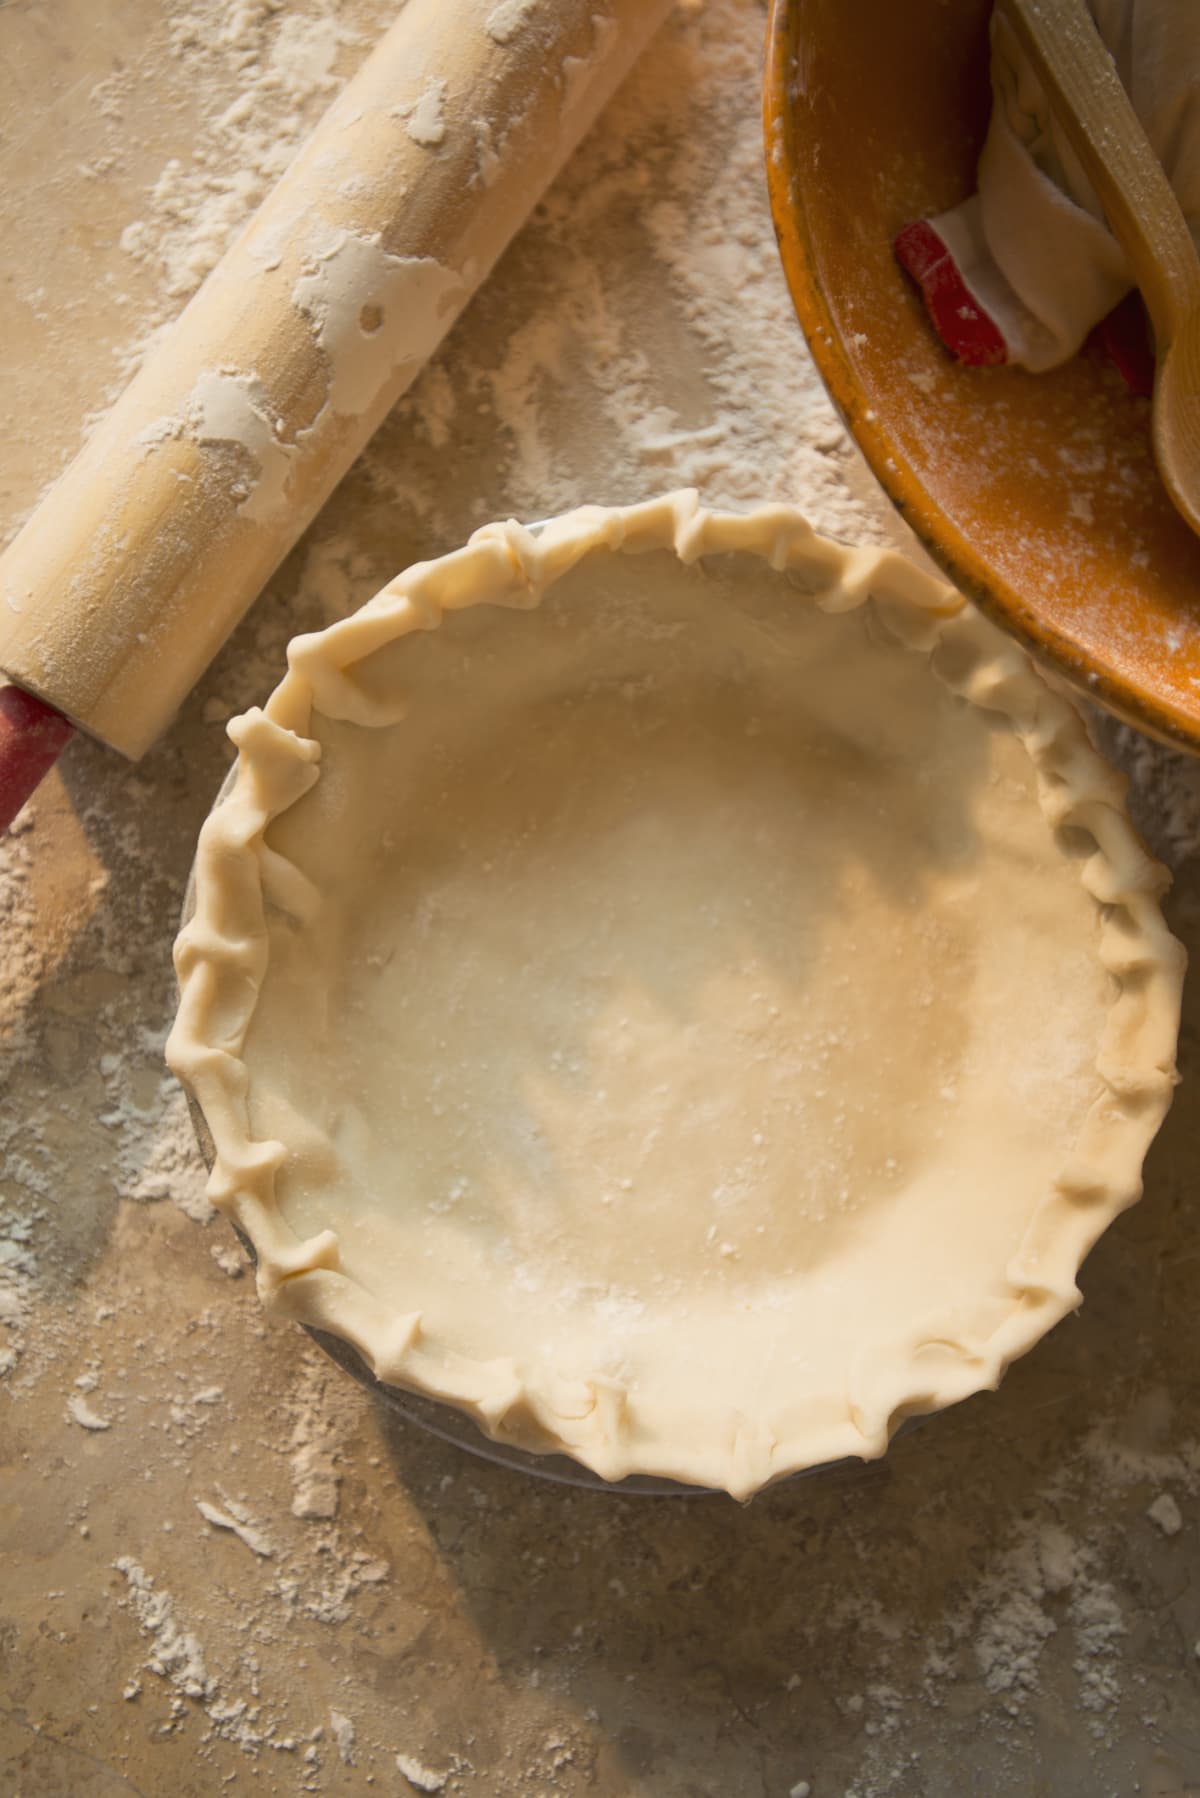 A plain pie crust beside a rolling pin and a bowl.